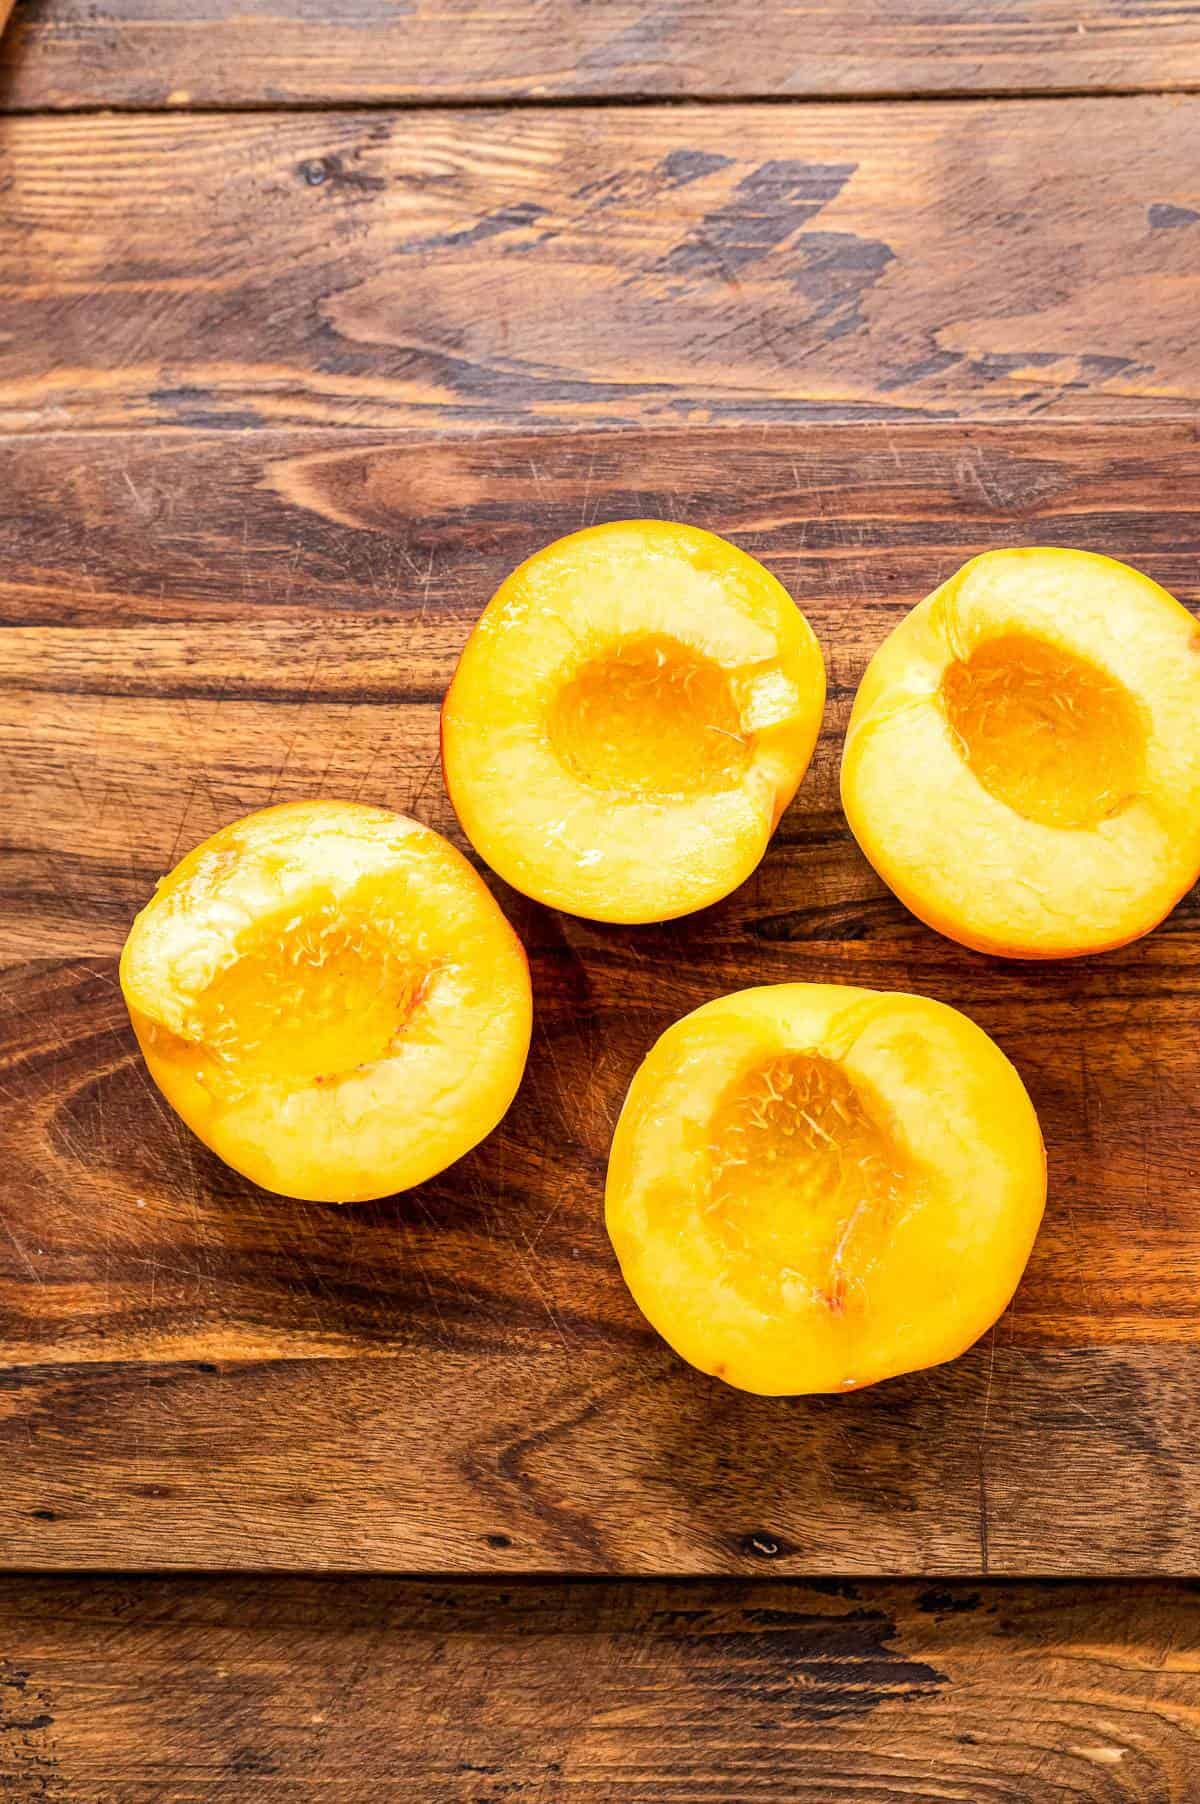 Peaches cut in half laying on wooden background.